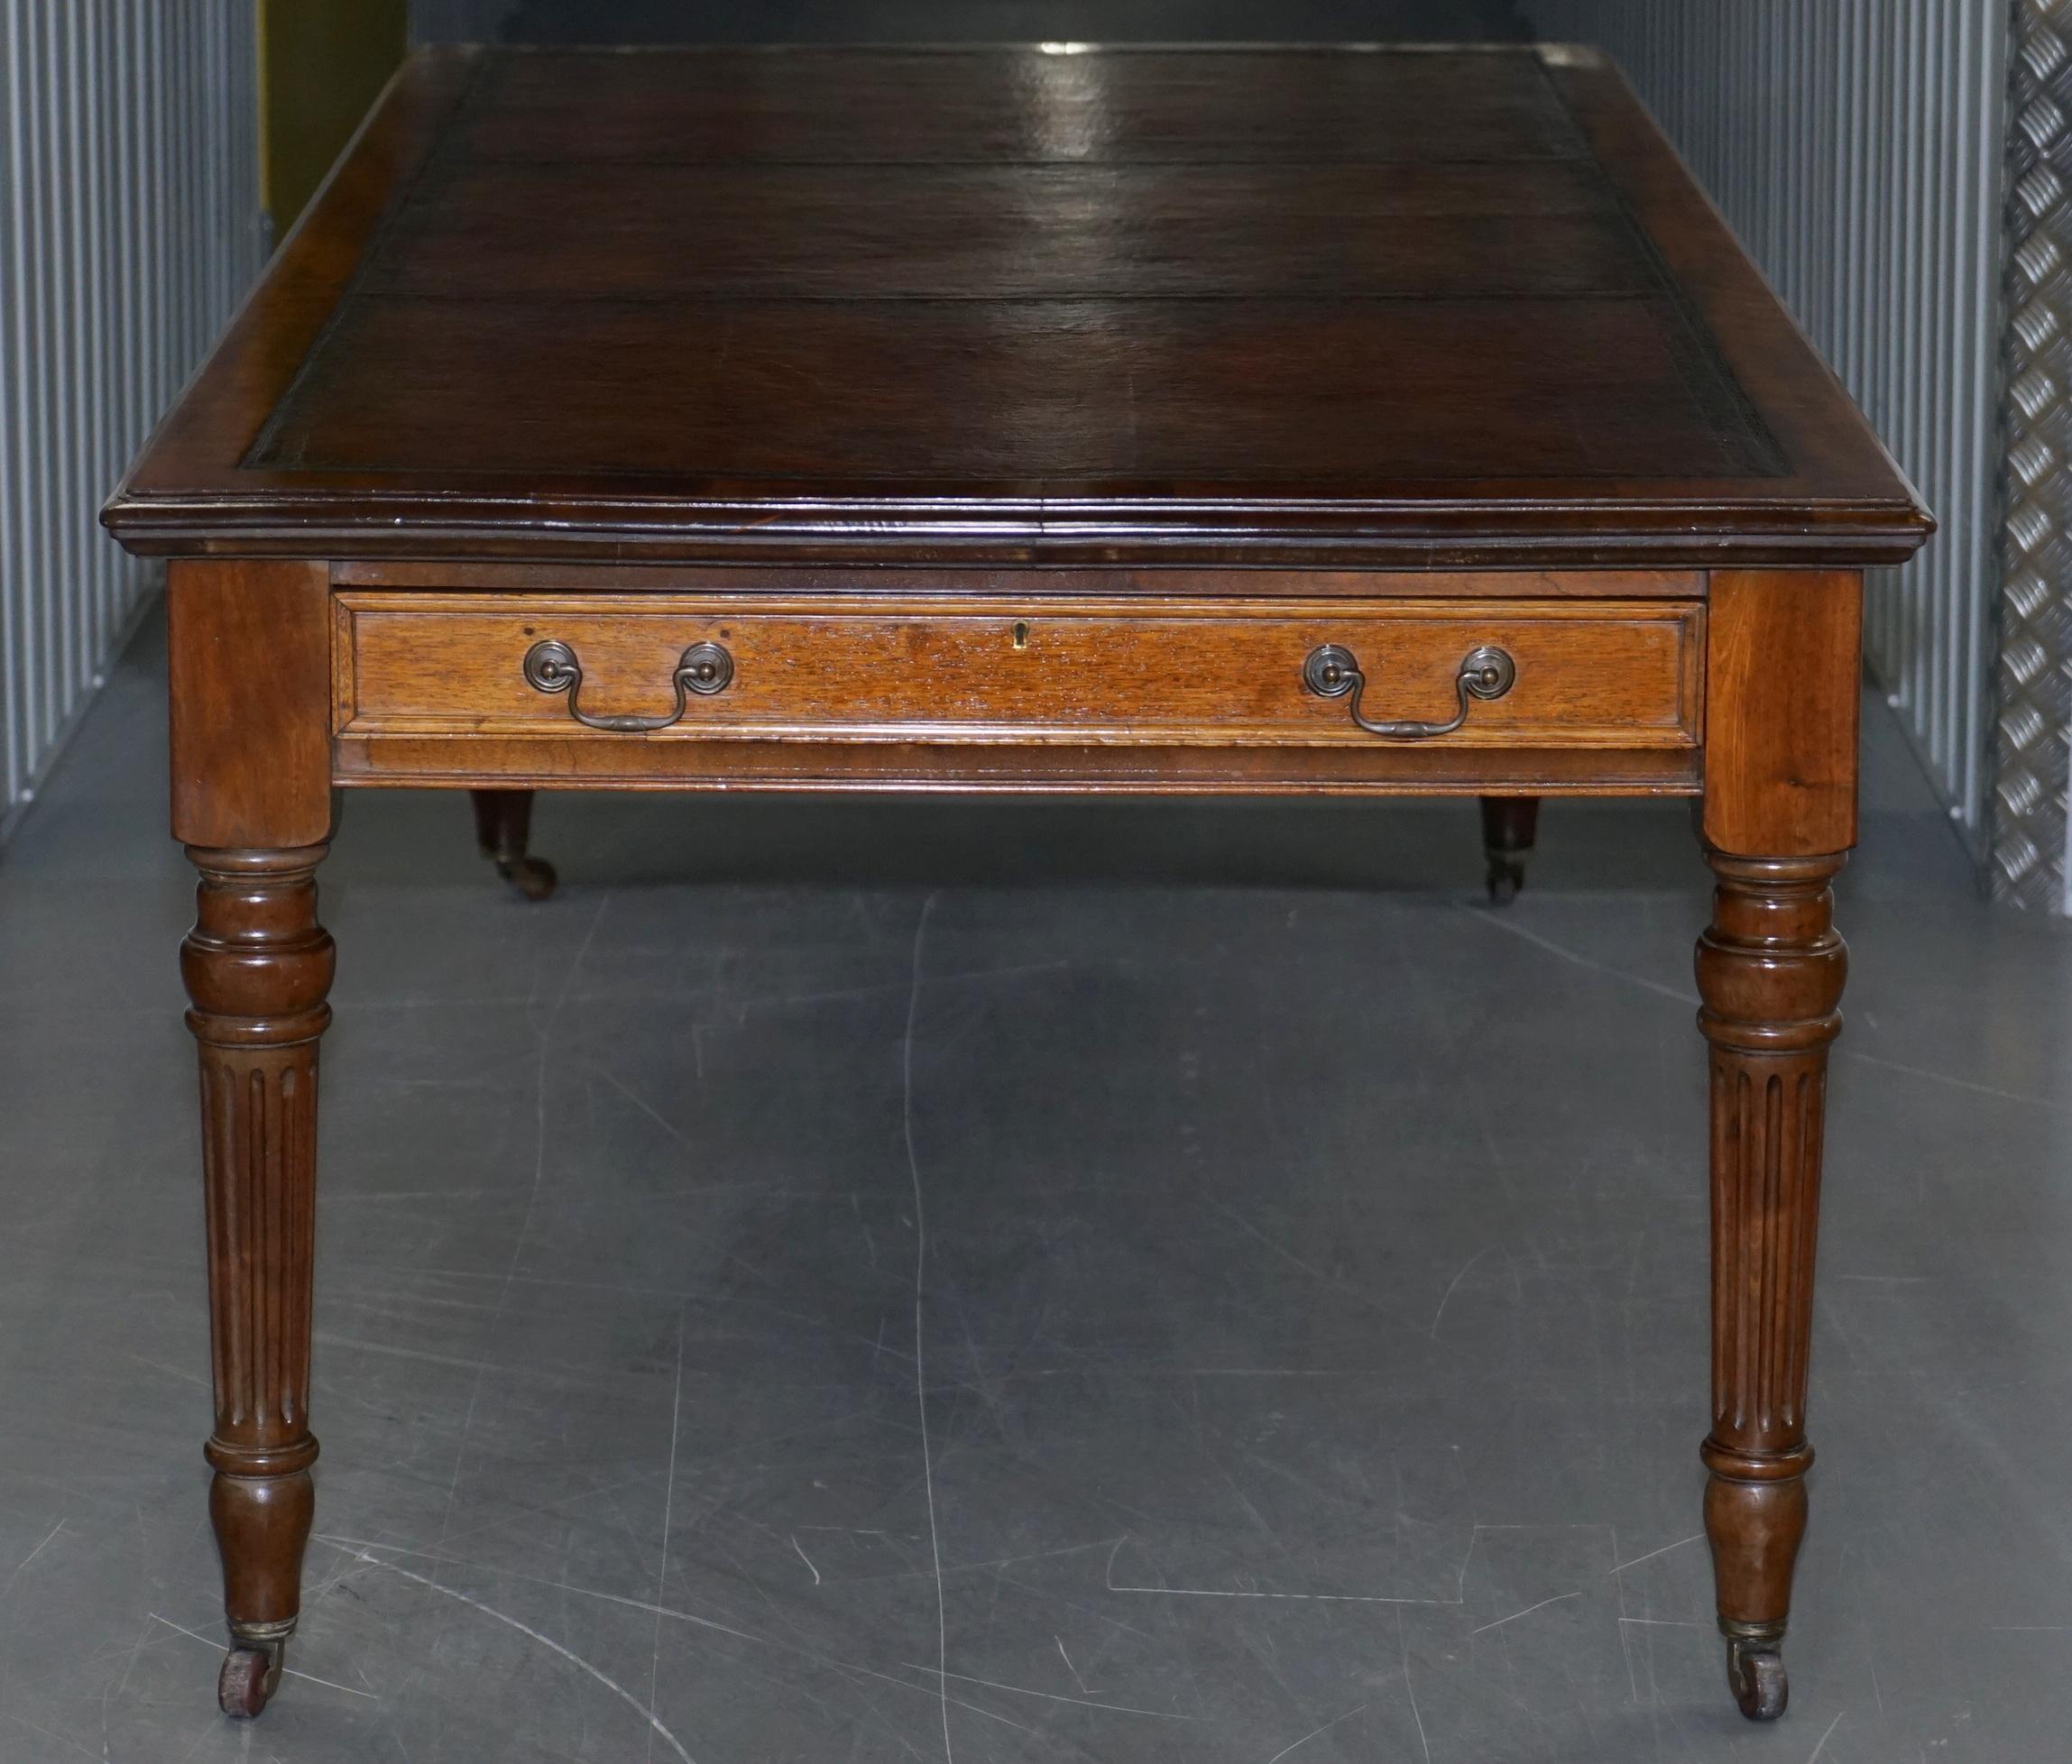 Huge Restored Victorian Refectory Library Dining Table Brown Leather Top Gillows 3